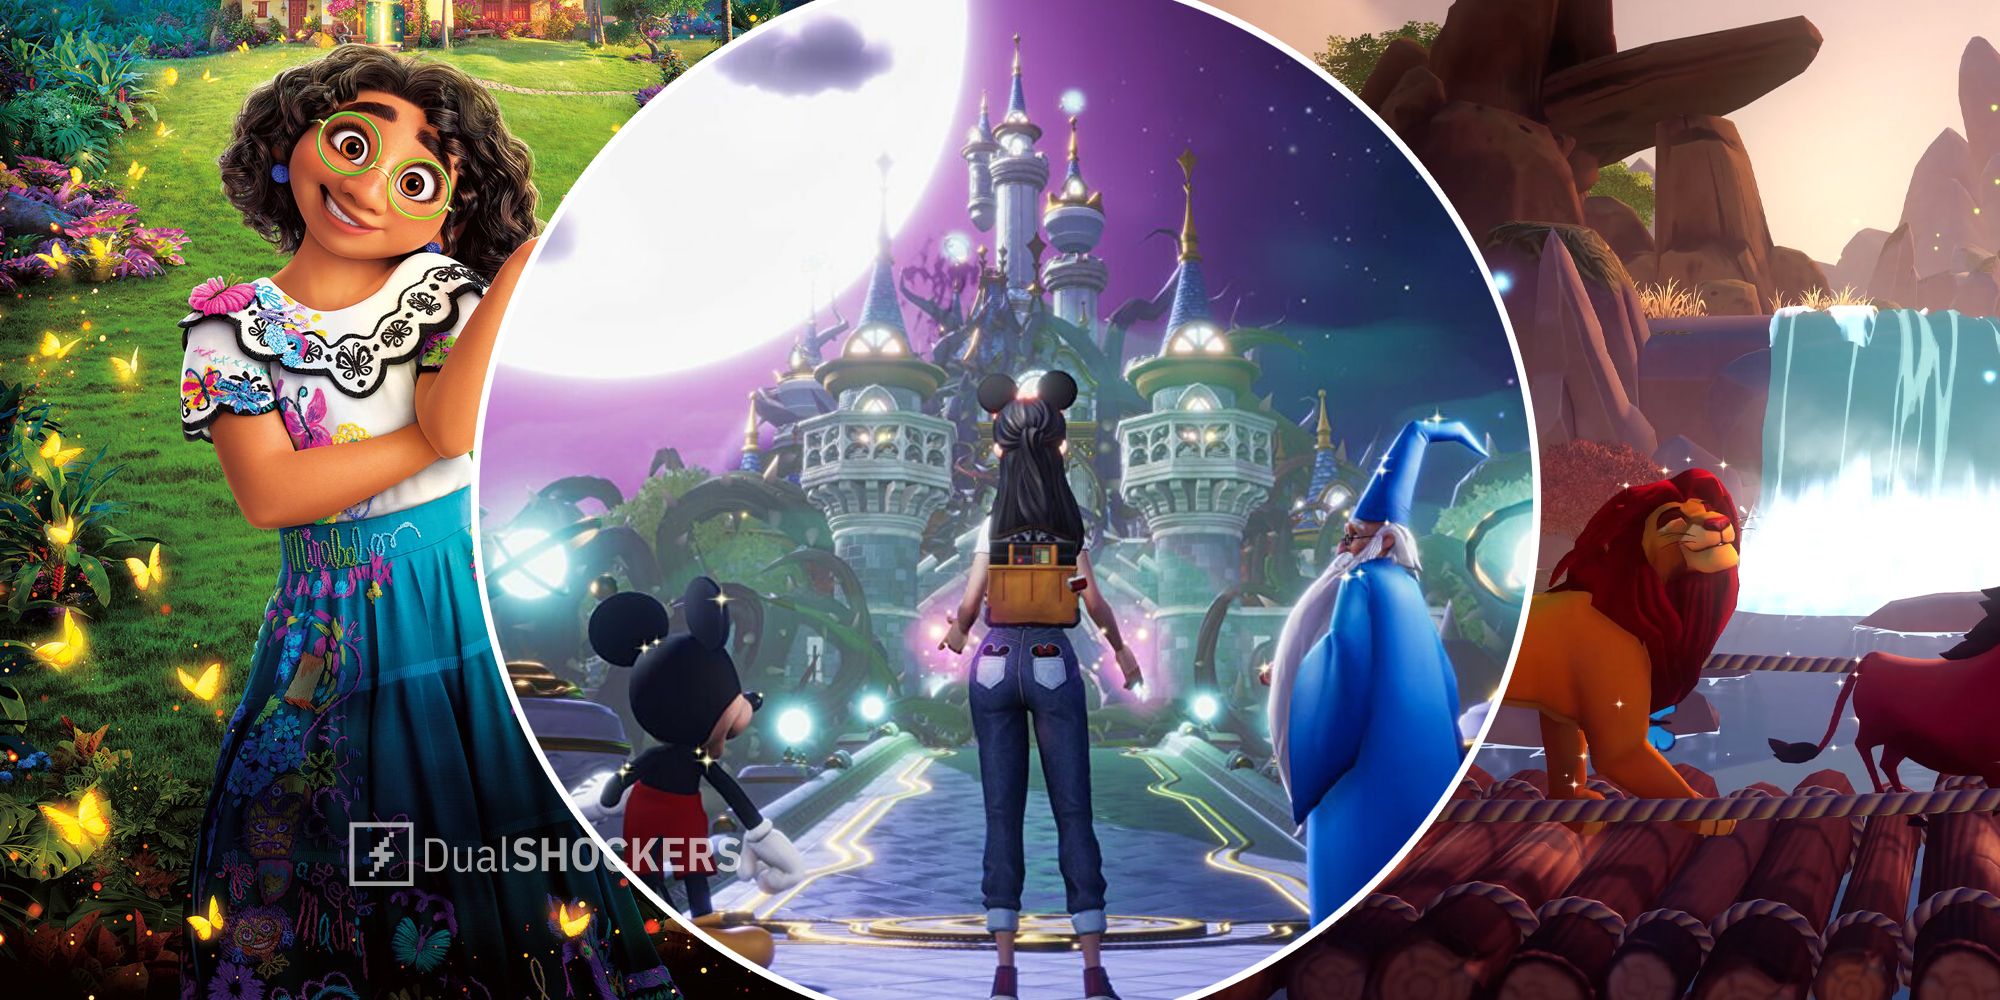 Disney Dreamlight Valley Mirabel from Encanto, promo image with Mickey and Merlin, Mufasa from The Lion King